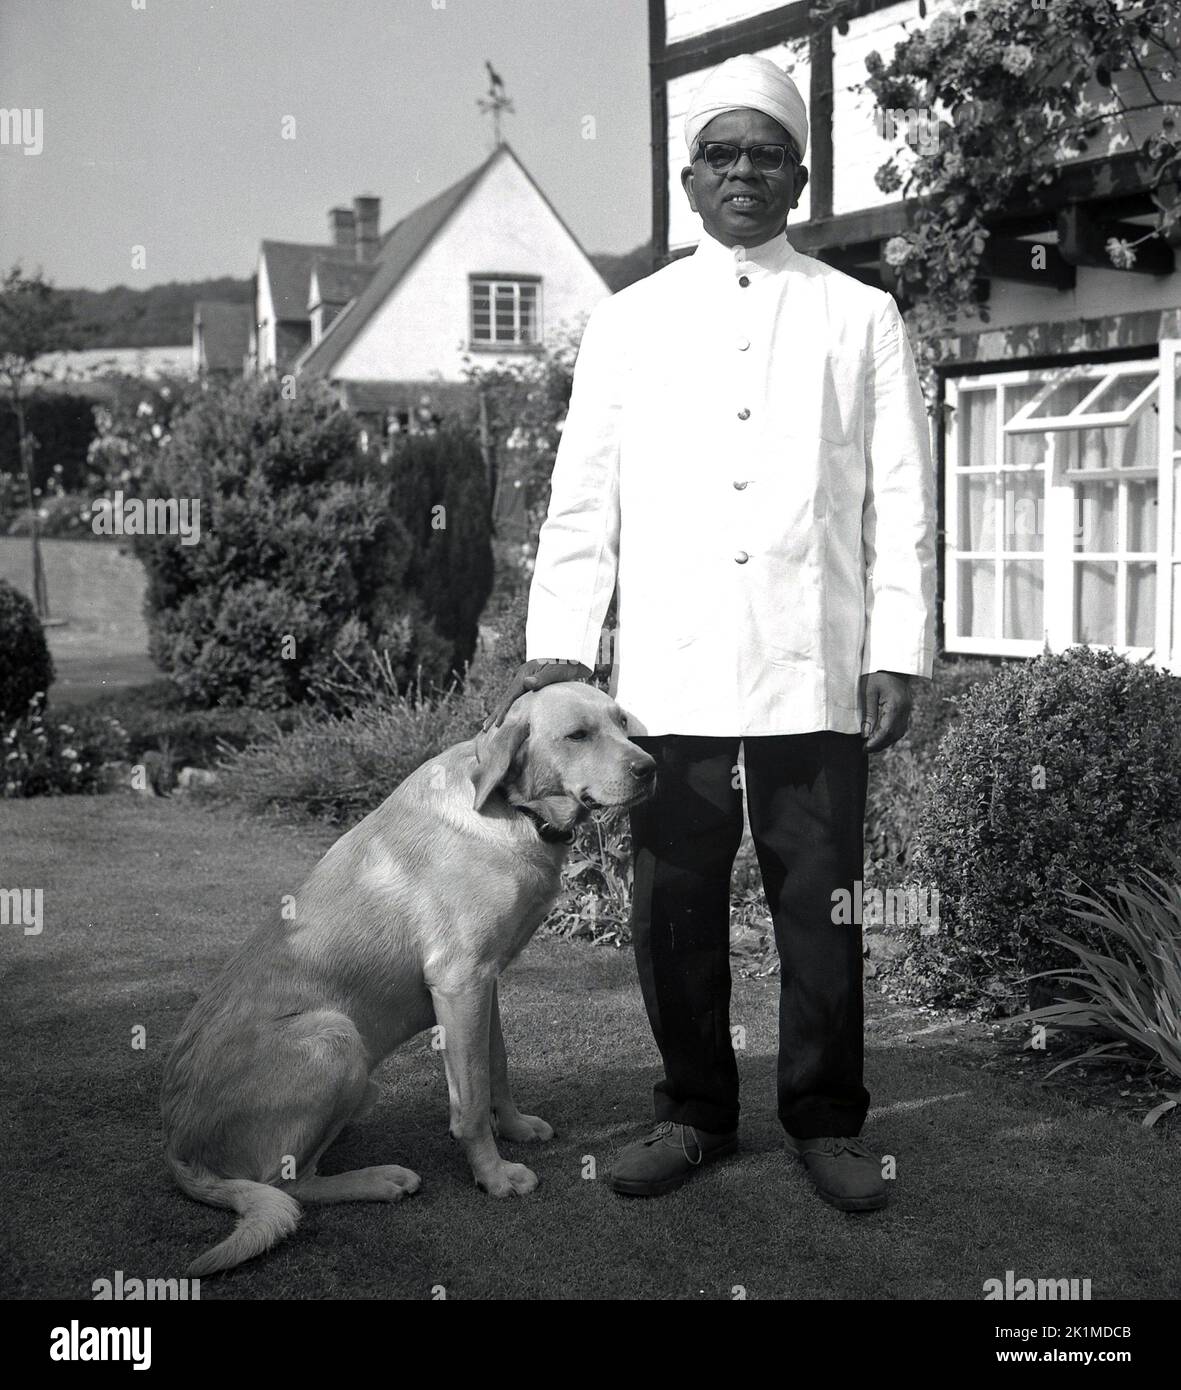 1950s, historical, a household servant, possibly a man friday or butler, an indian man in a uniform, a white tunic and wearing turban standing for a photo with the family pet dog, England, UK. Olinks??? Stock Photo